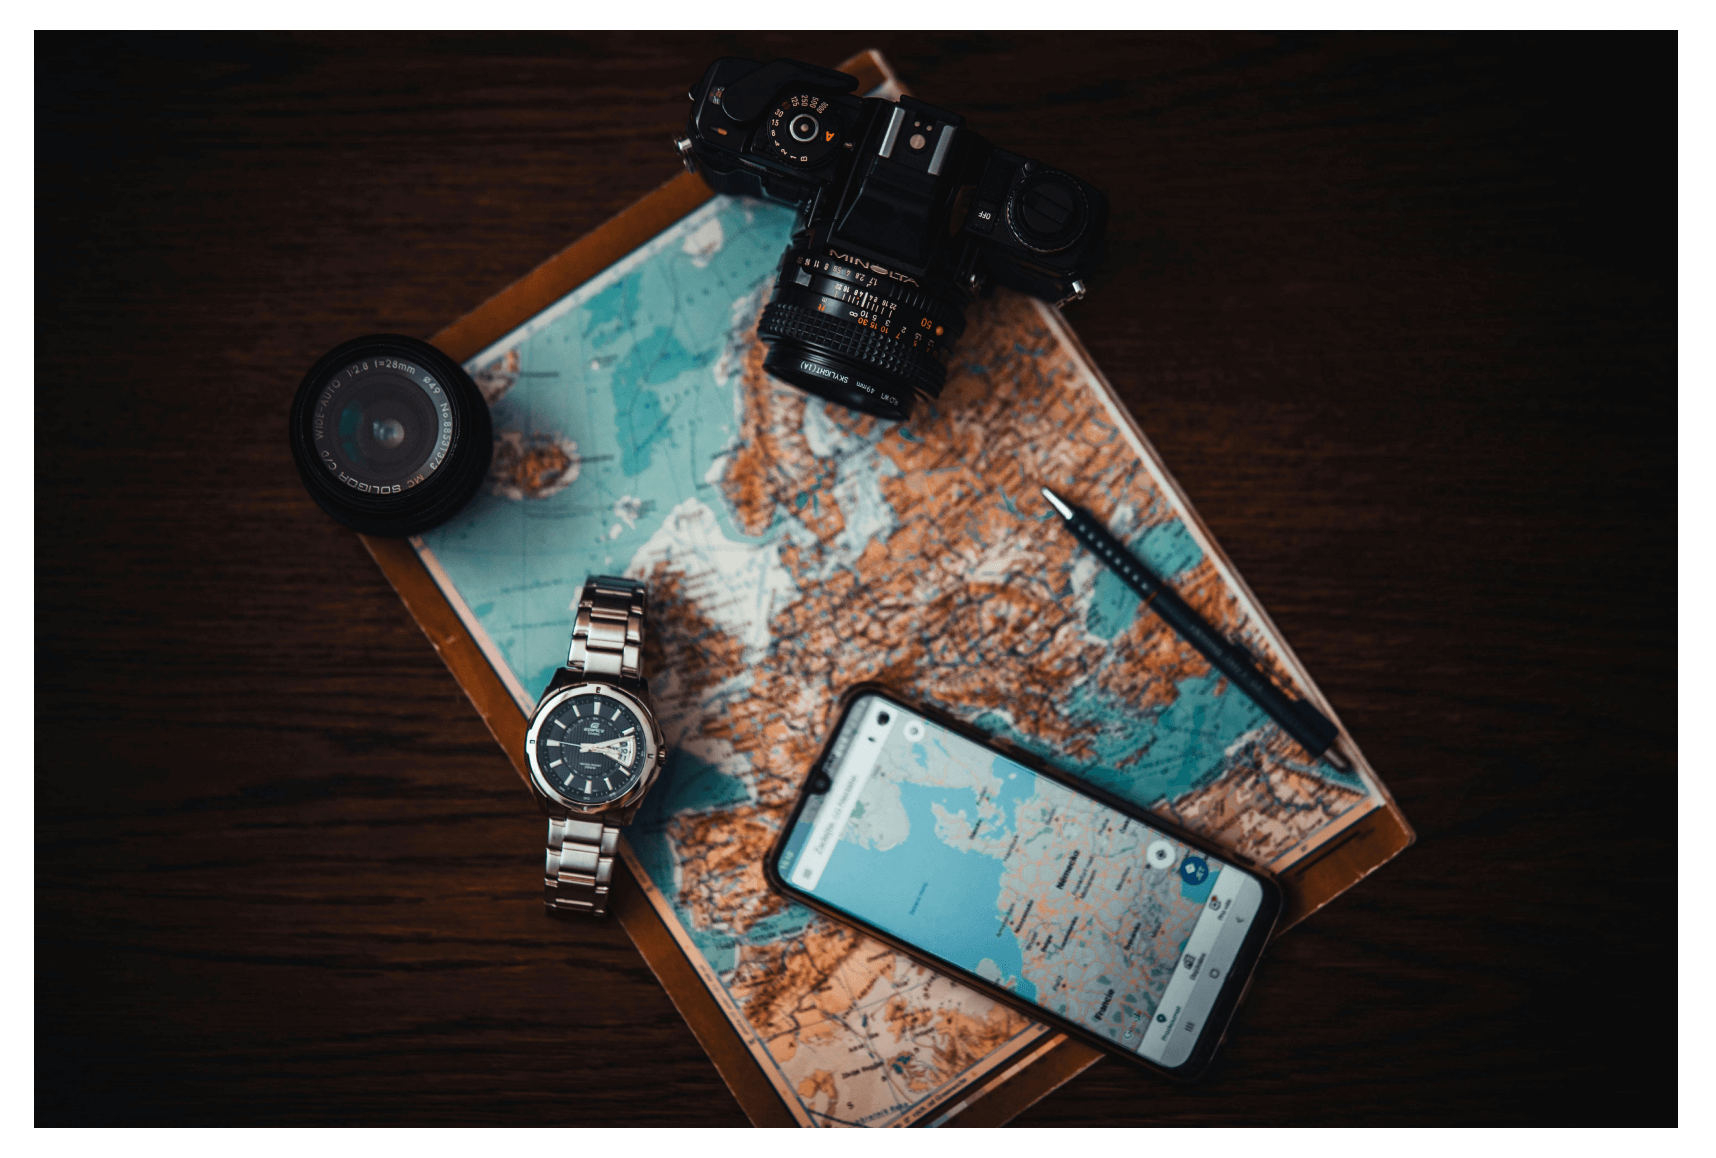 Mockup of a travel app with travel accessories (map, camera, watch, compass)